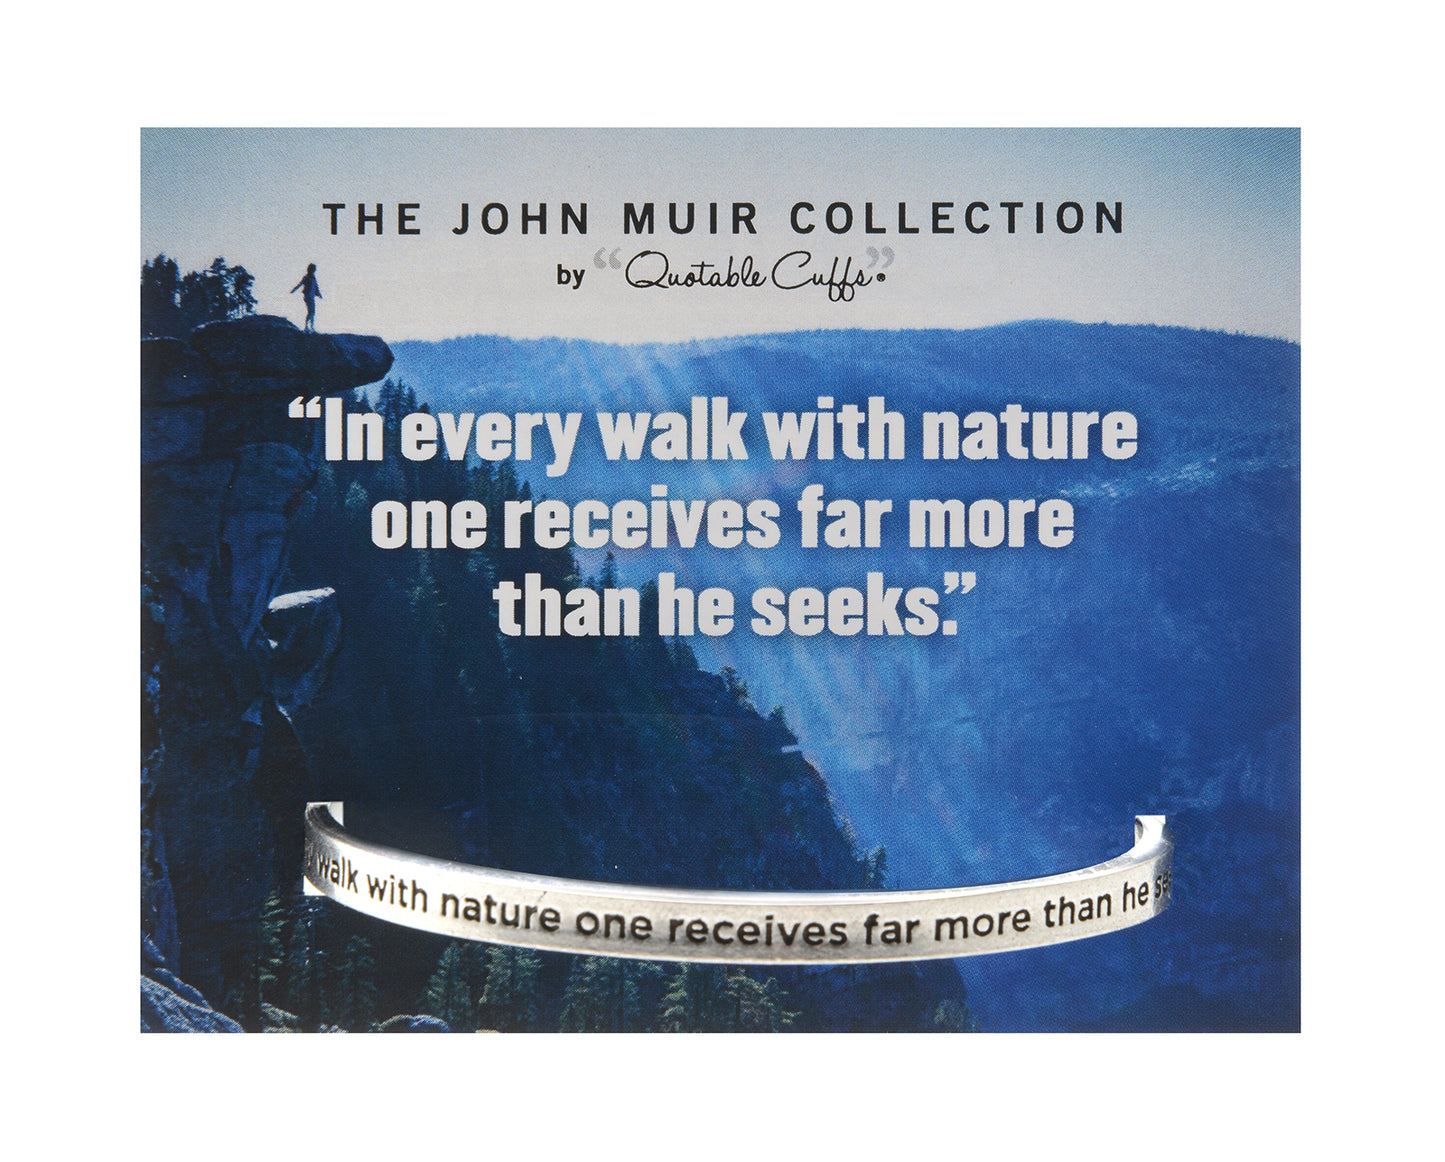 In every walk with nature one receives far more than he seeks John Muir Quotable Cuff on backer card